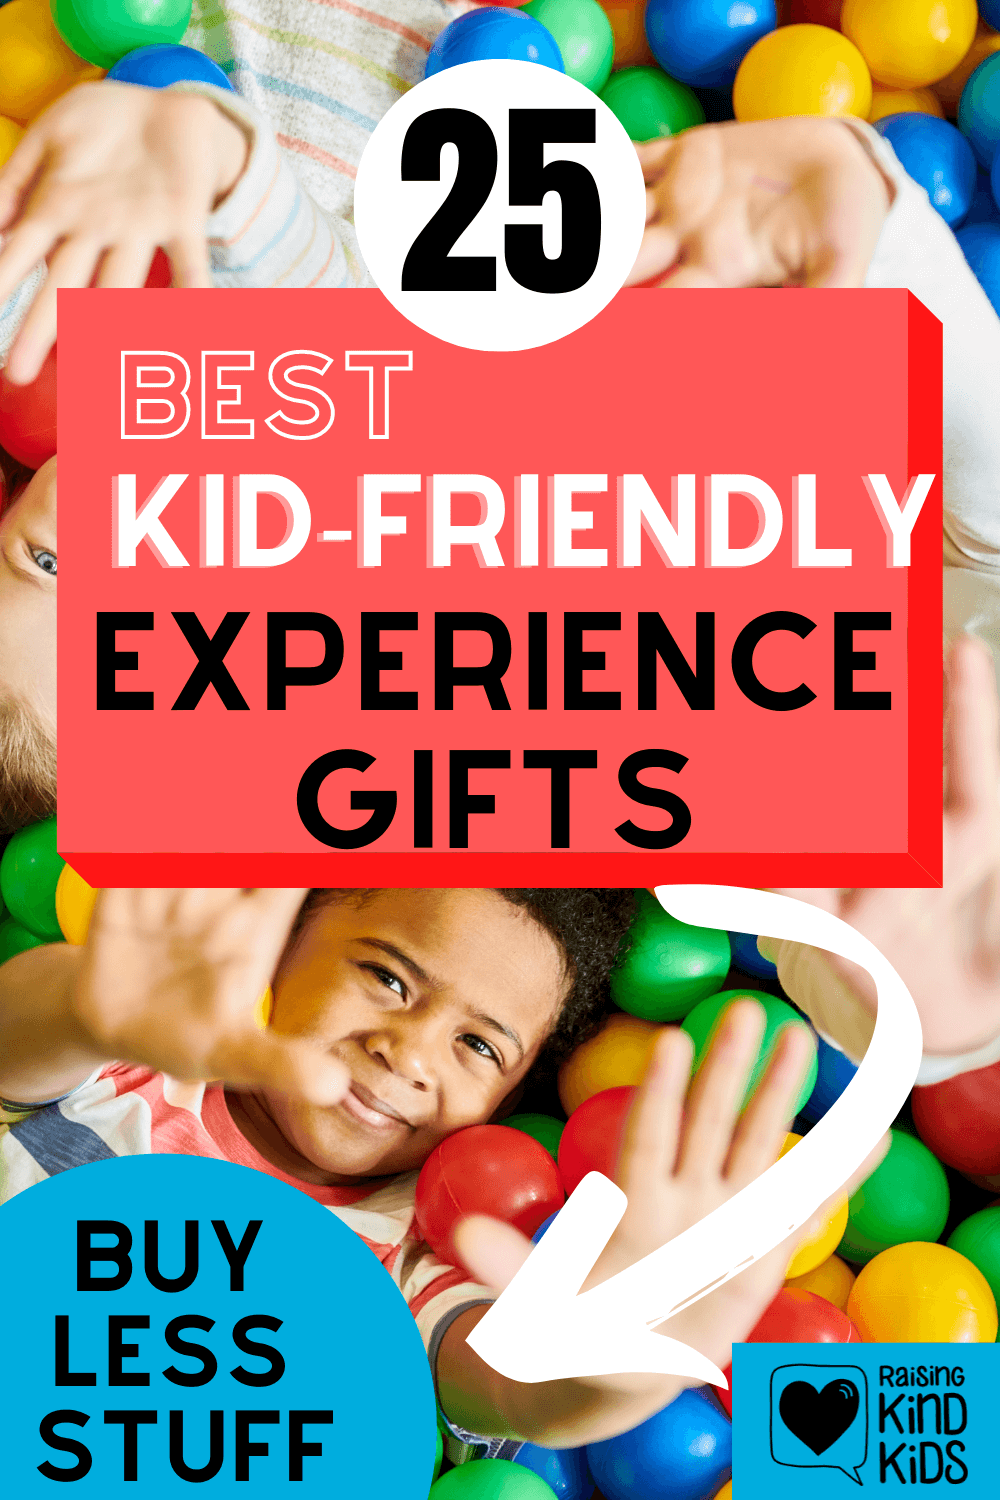 11 Best Science Gifts for Kids | Discover Magazine